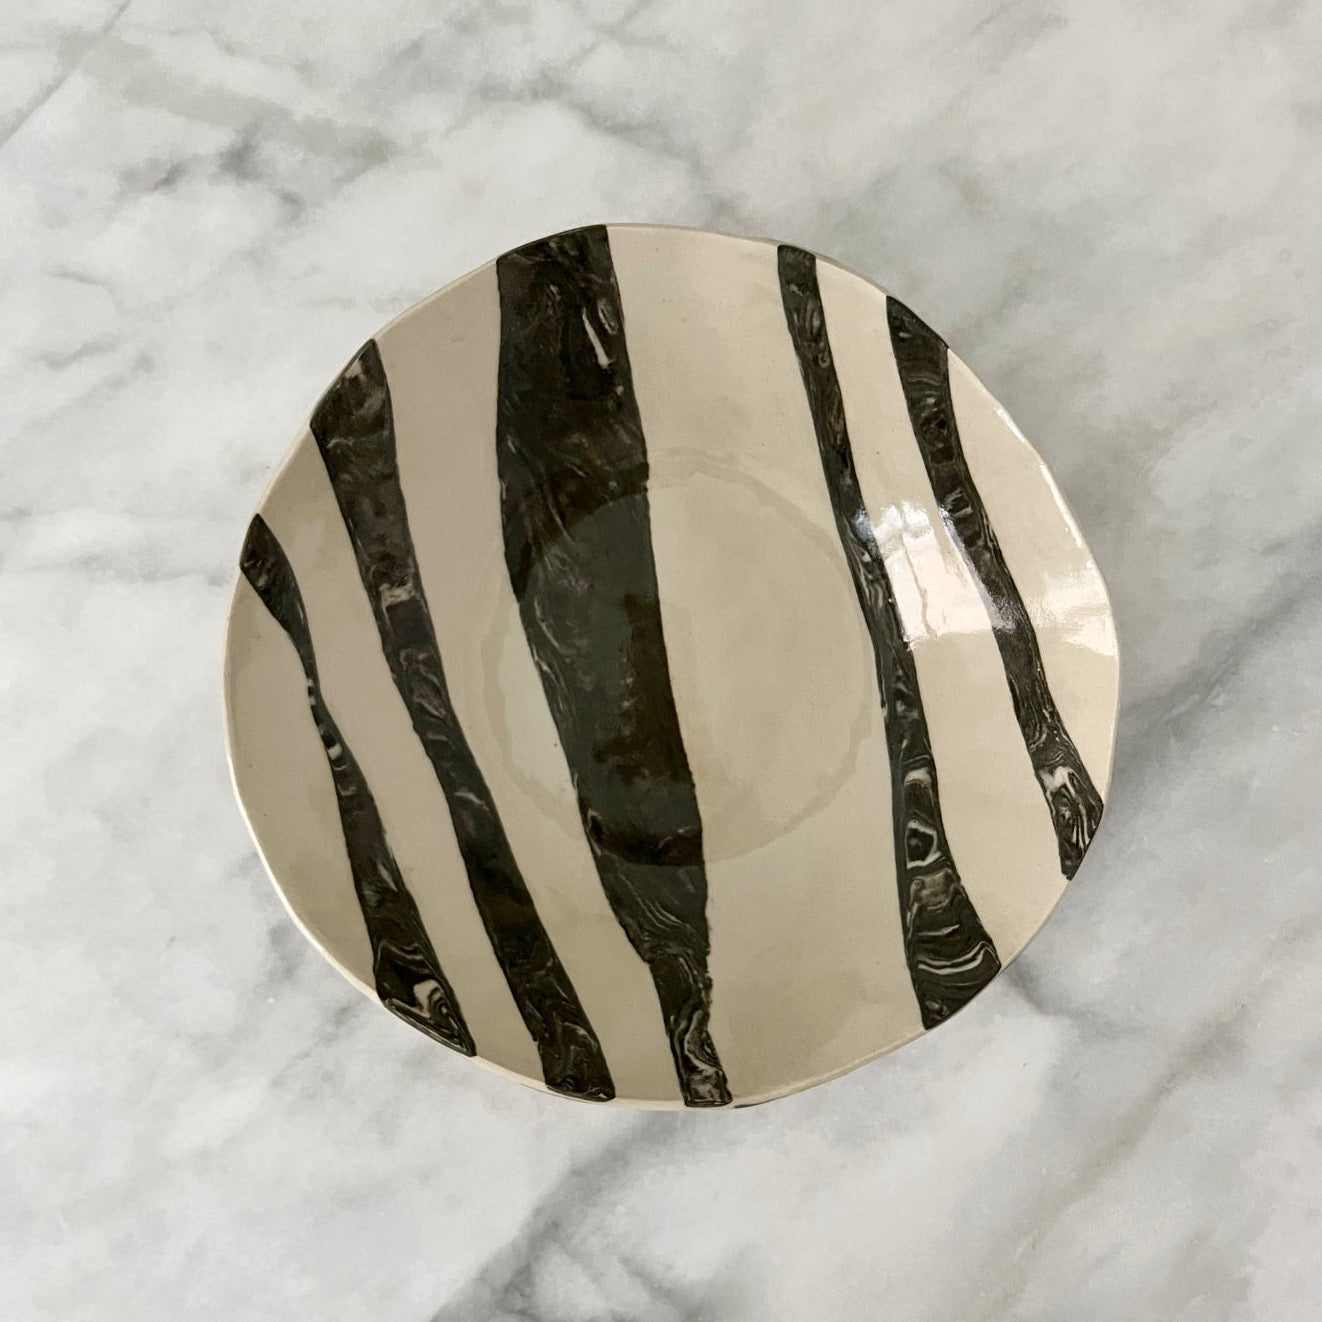 one of a kind ceramic anthracite and off white plates made in Corsica